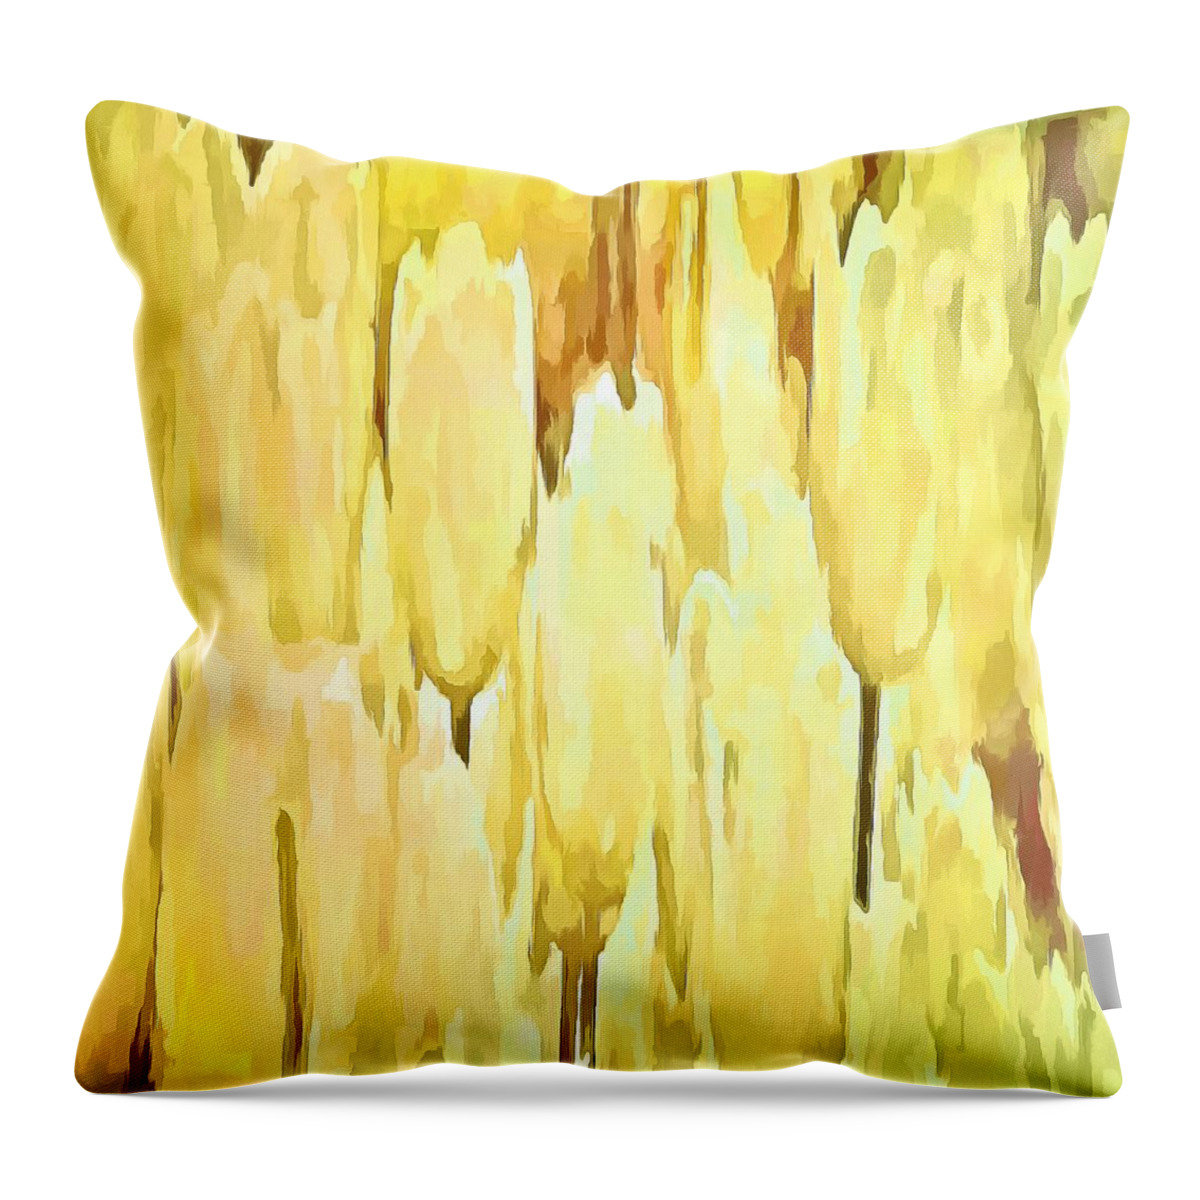 Tulips Throw Pillow featuring the painting Pale Yellow Tulips Abstract Floral Pattern by Taiche Acrylic Art